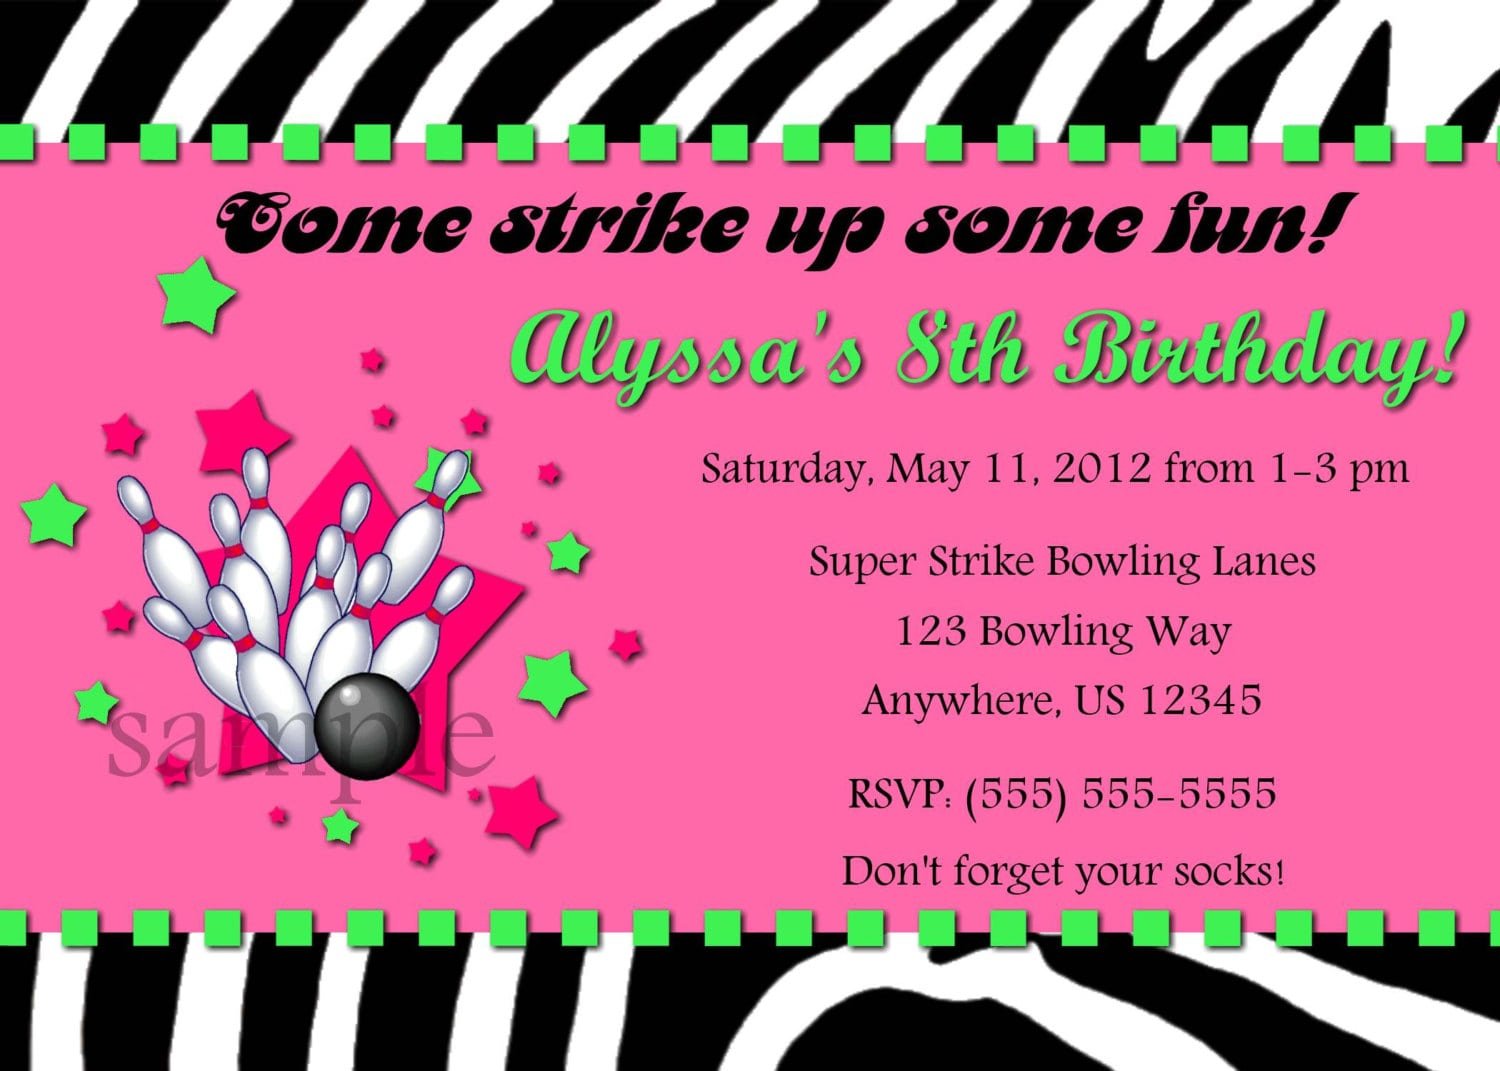 Bowling Party Invitations Templates Ideas   Bowling Party